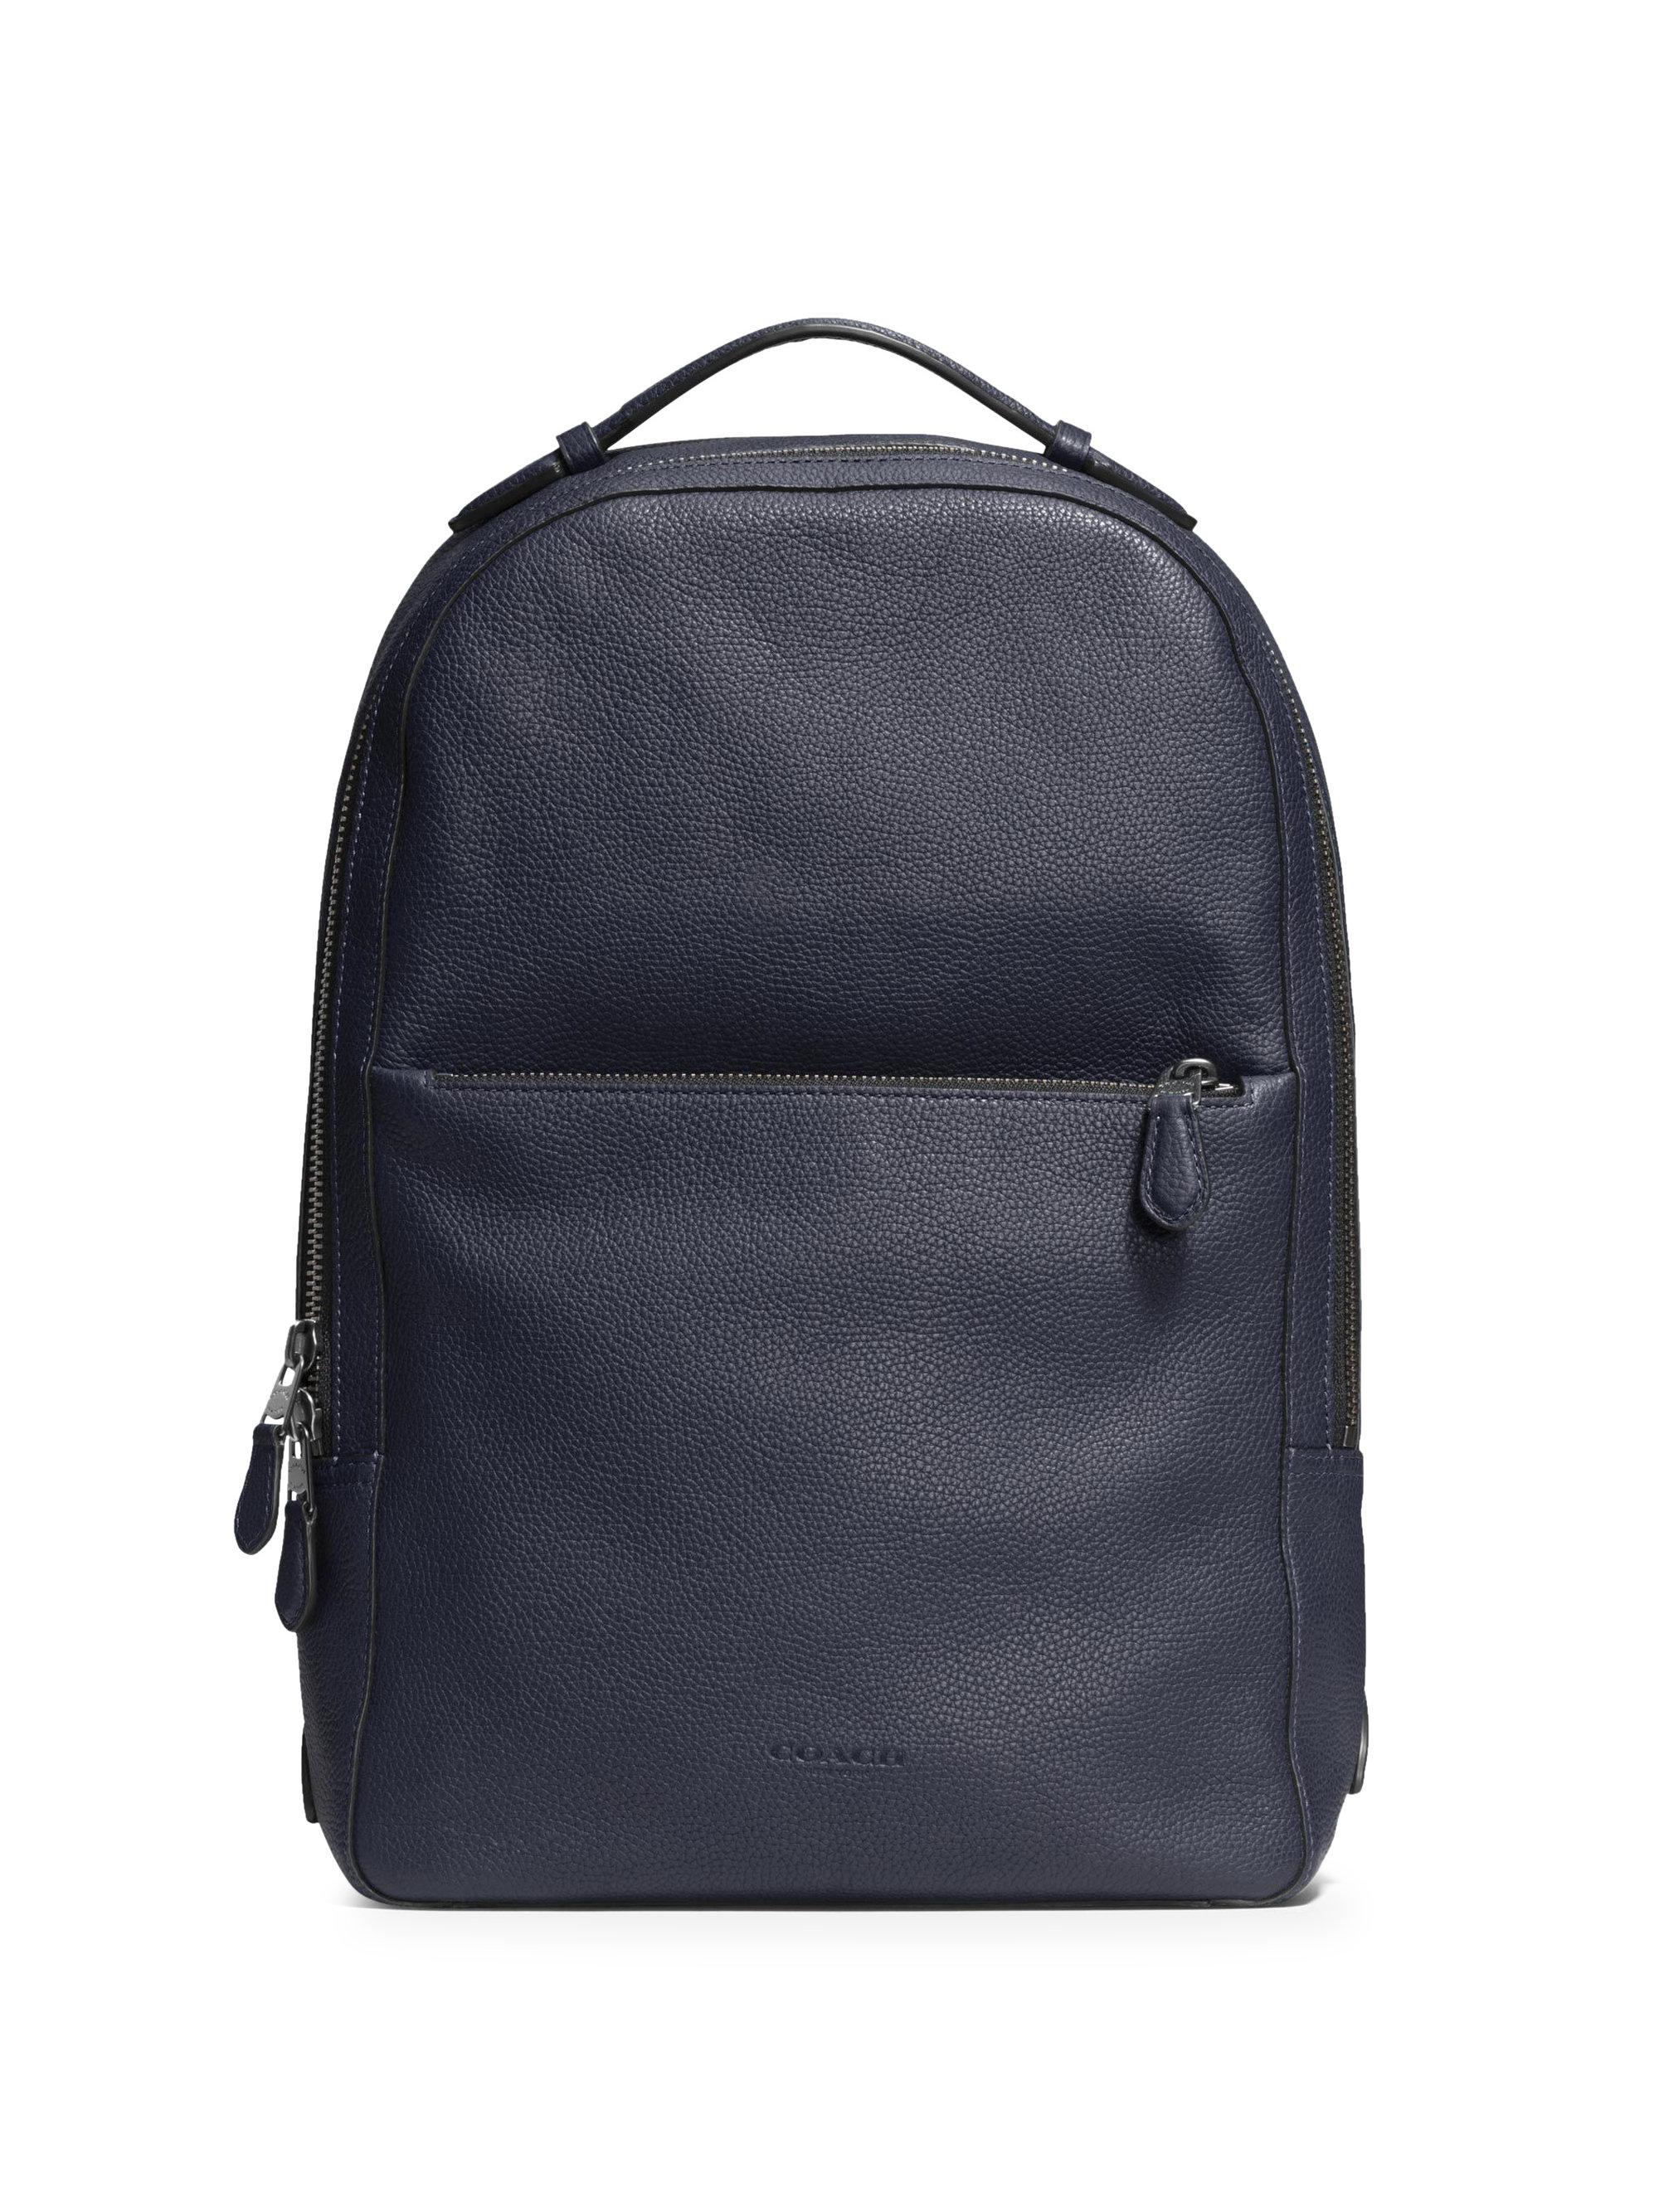 COACH Solid Leather Backpack in Navy (Blue) for Men - Lyst